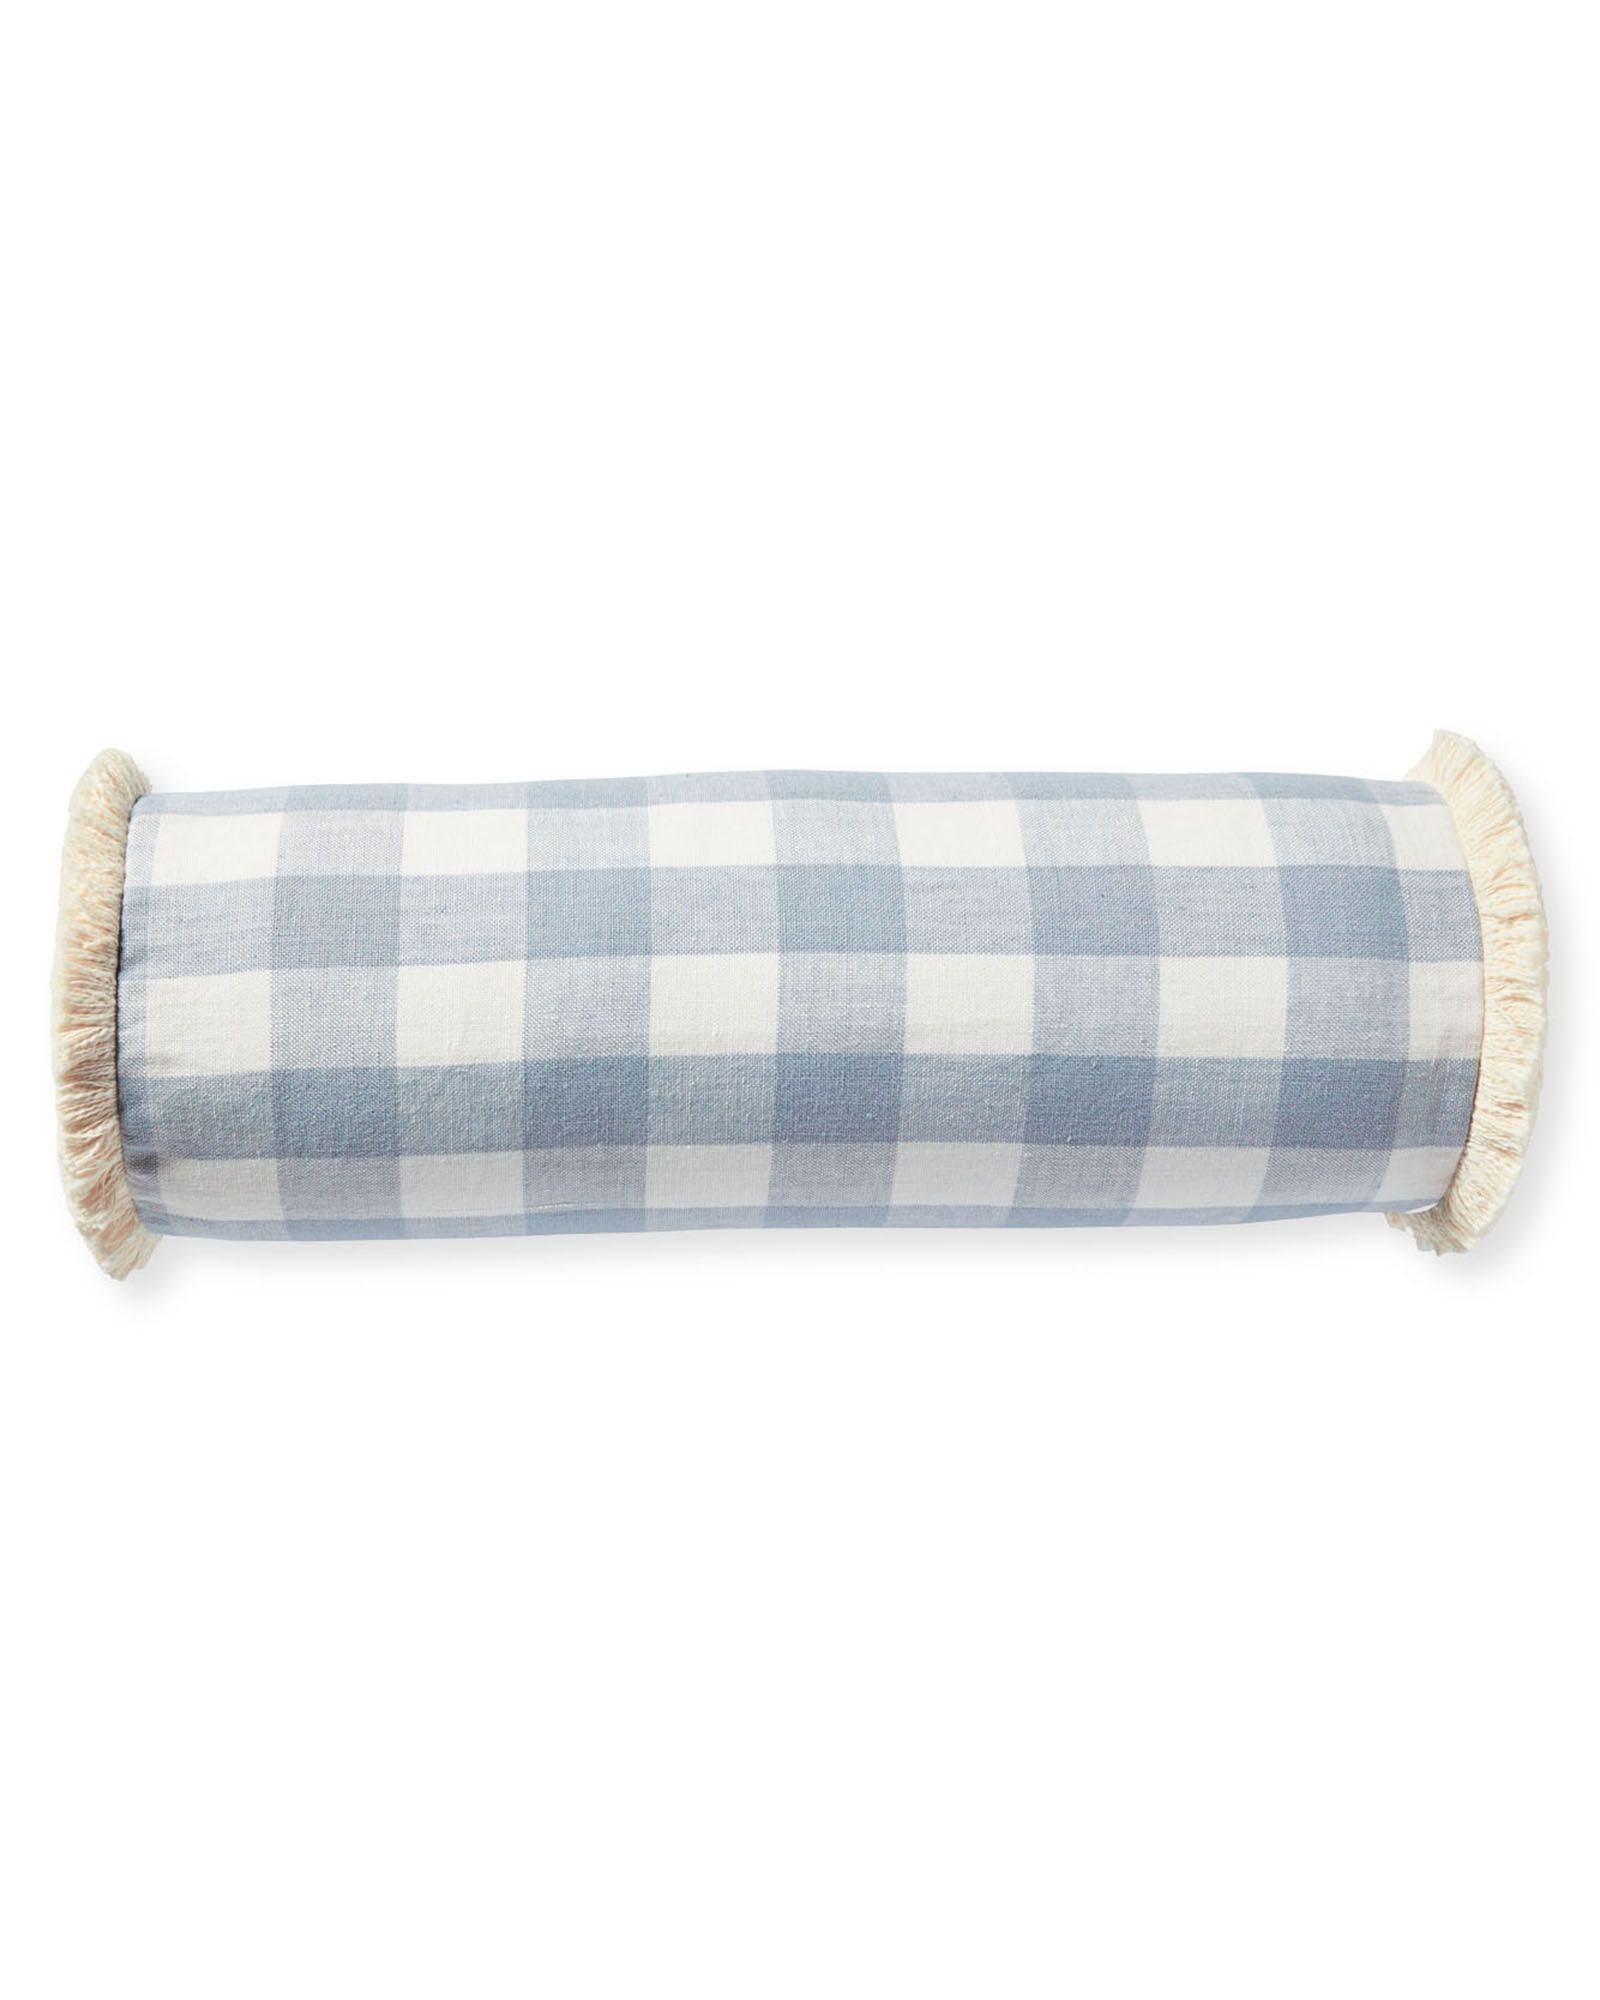 Classic Linen Gingham Pillow Cover | Serena and Lily